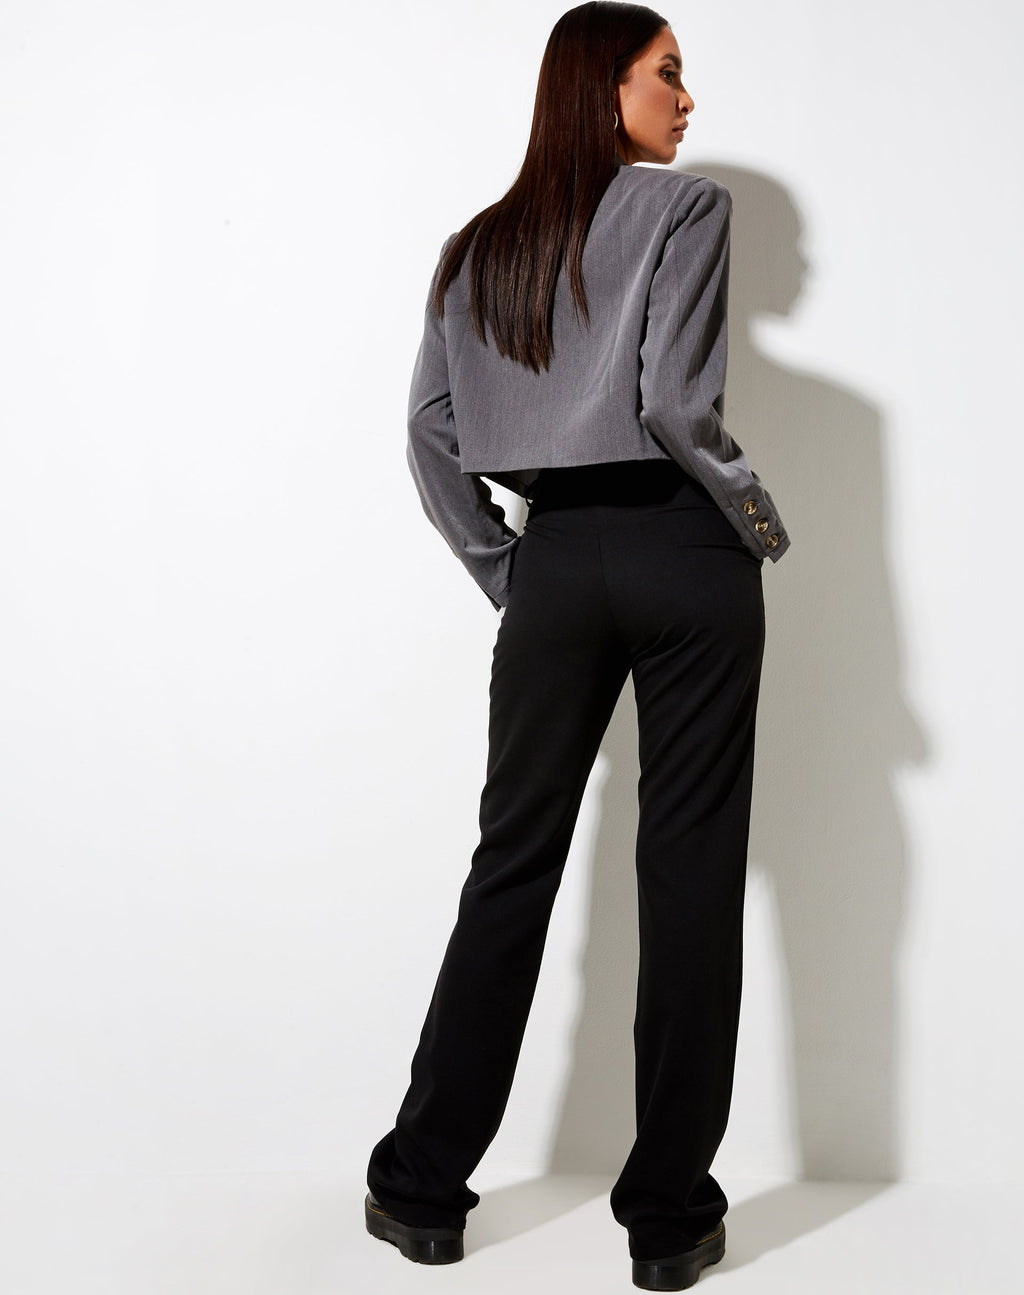 Zoven Flare Trouser in Tailoring Black